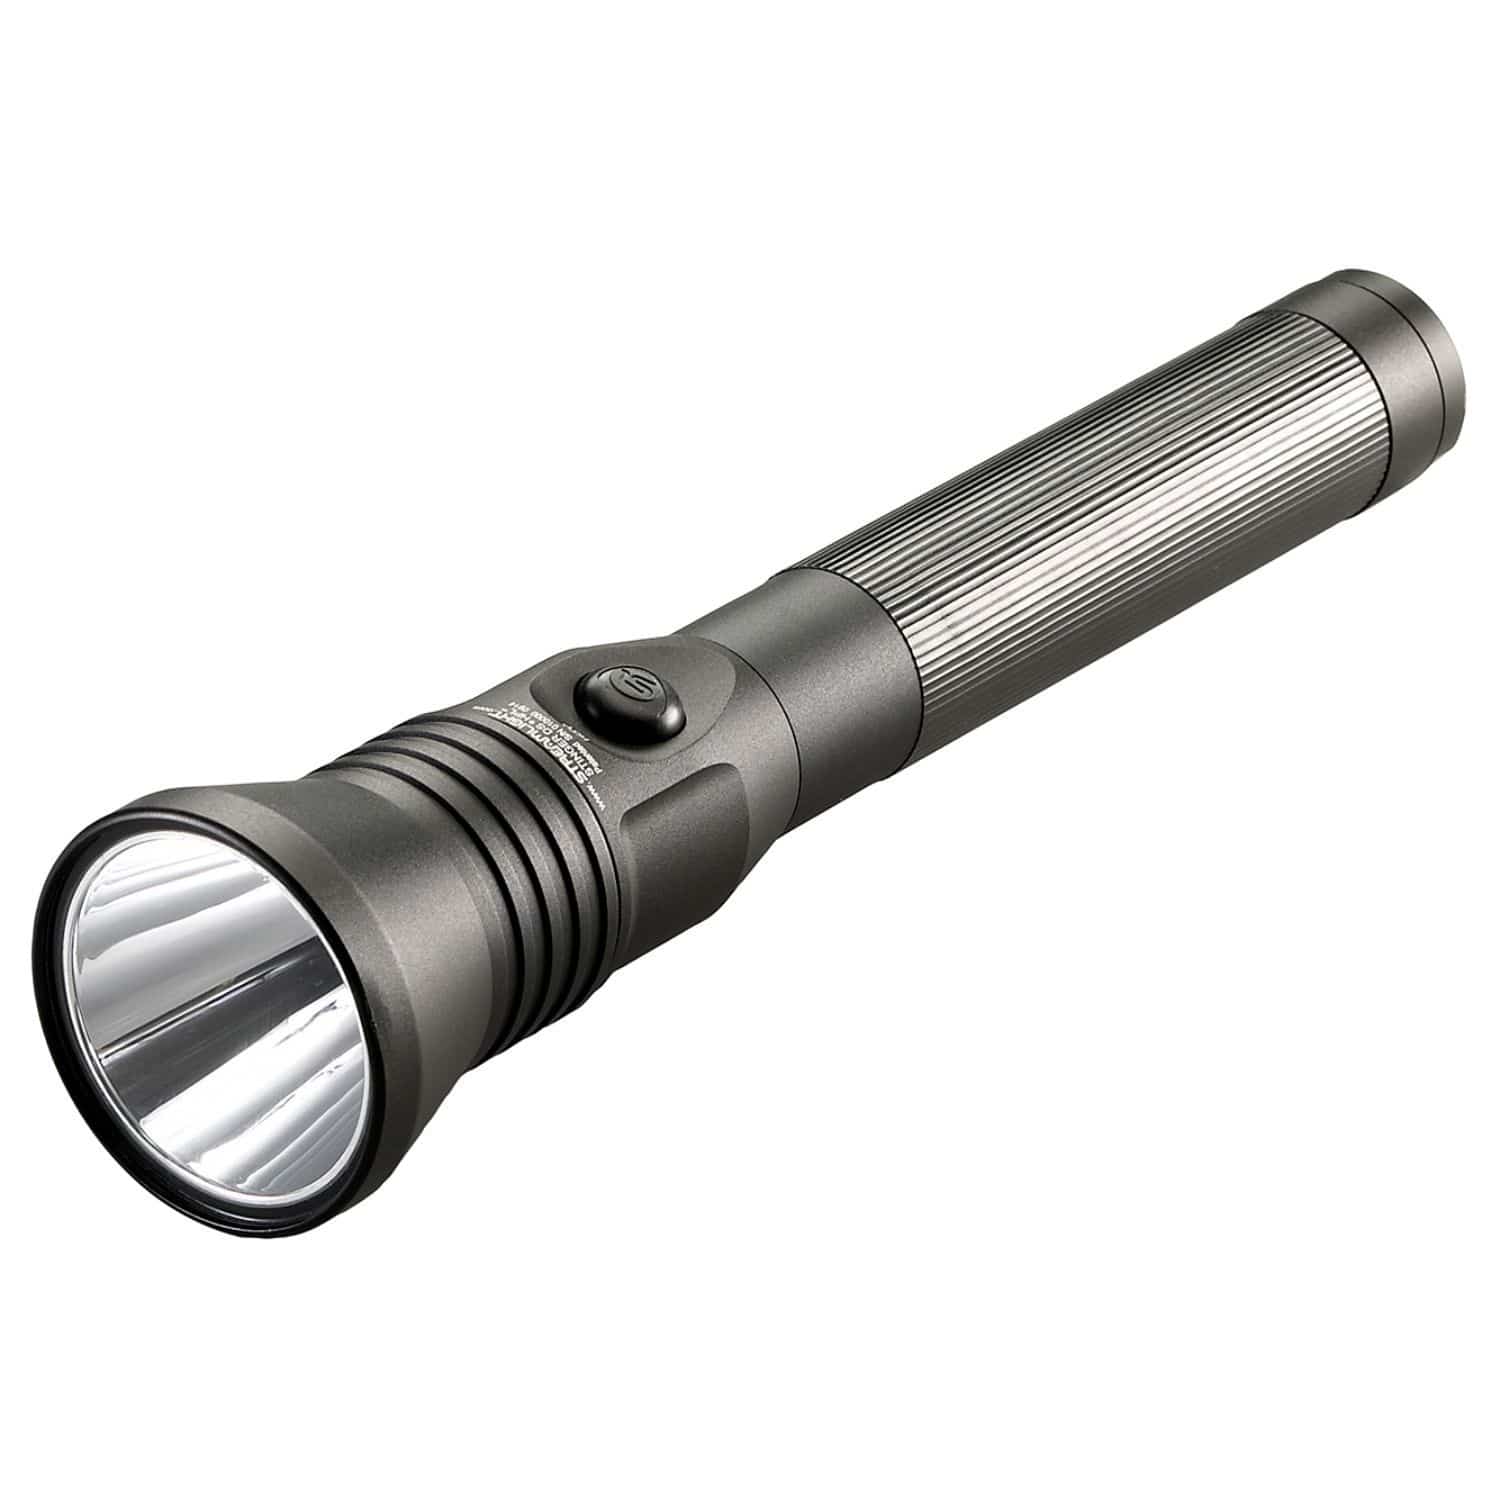 Streamlight Lights : Rechargeable Lights Streamlight Stinger DS HPL Long Range Recharge Dual Switches